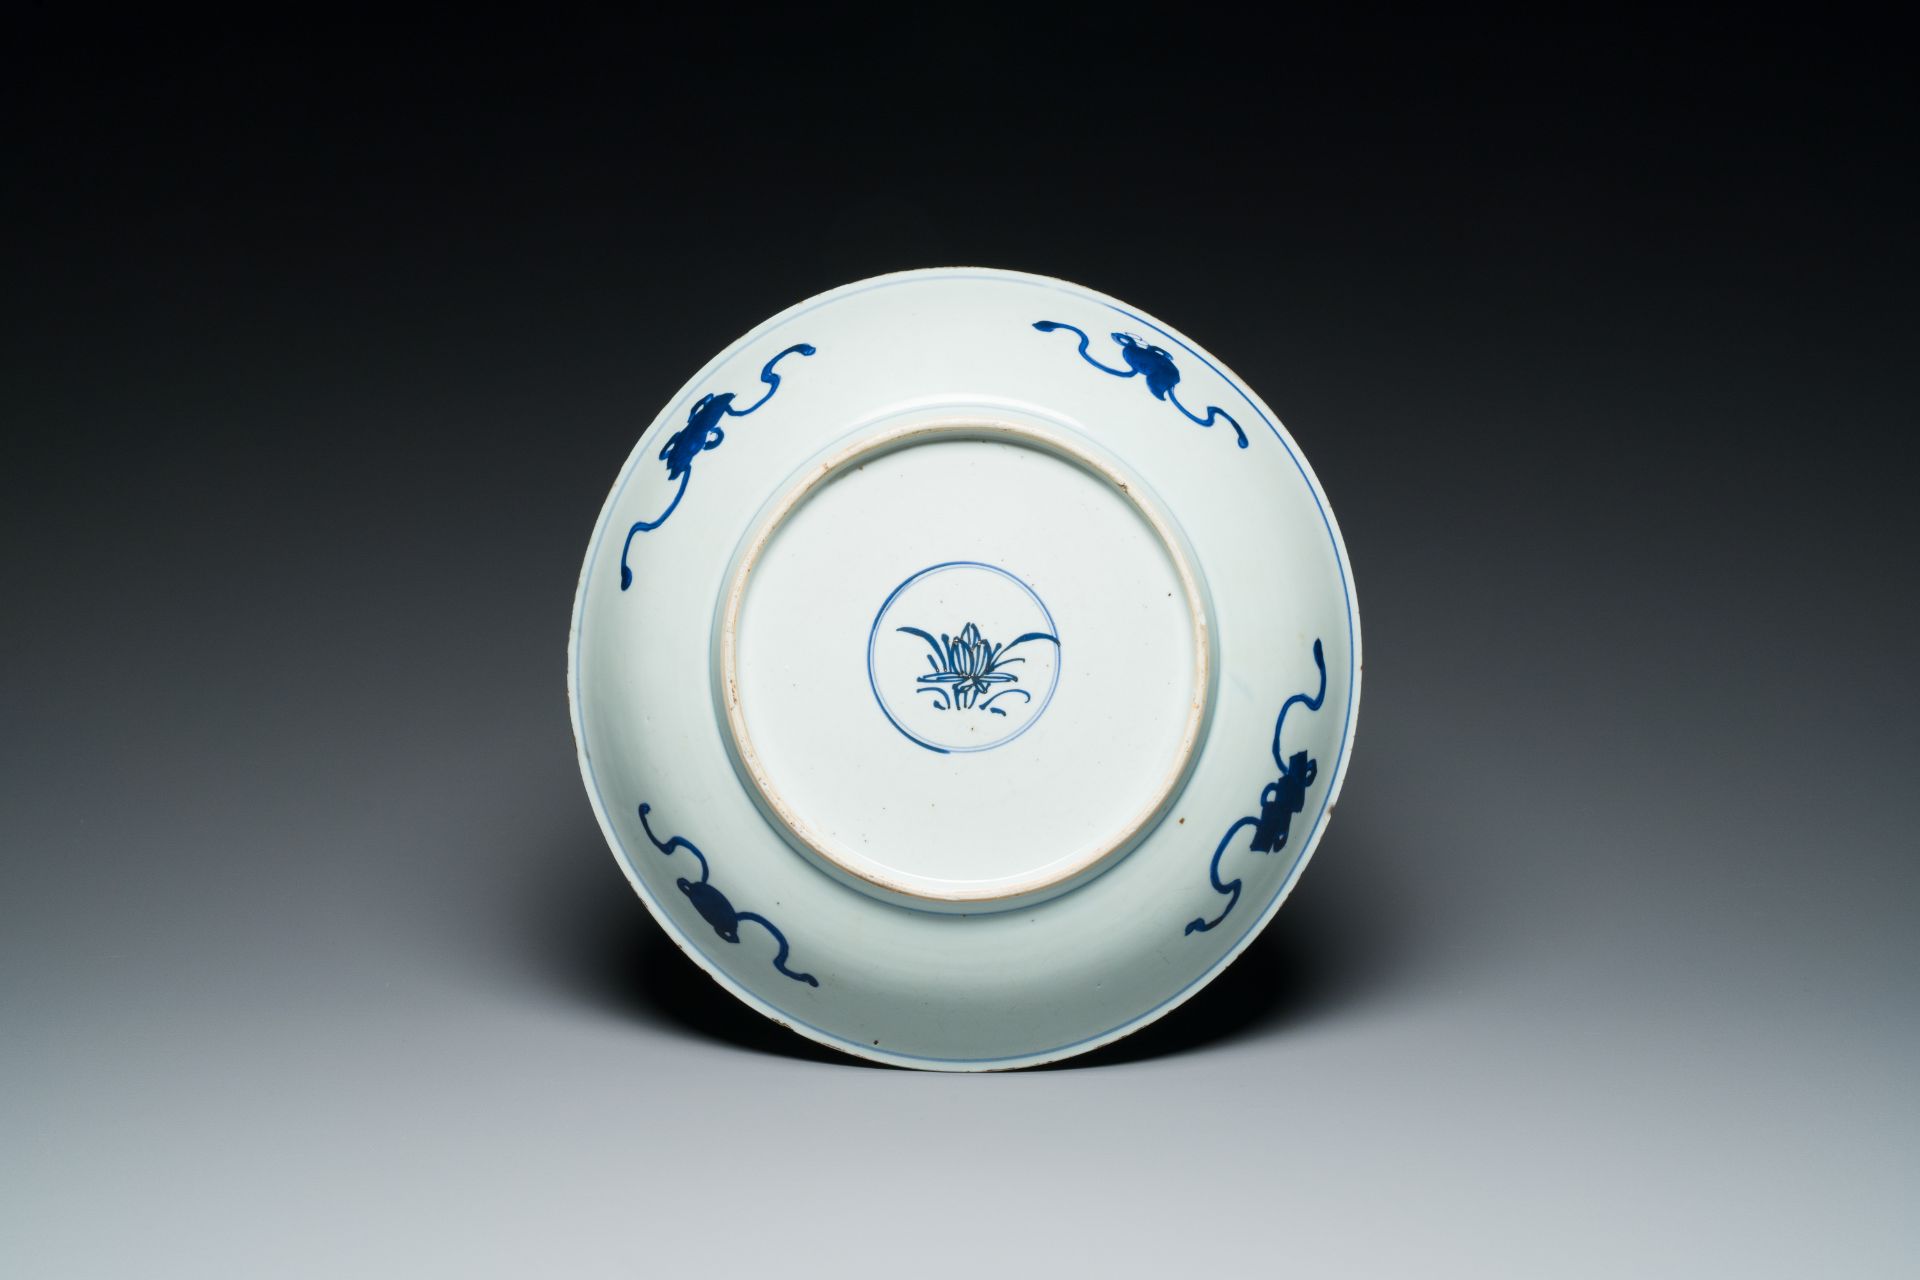 A varied collection of Chinese porcelain, 18/19th C. - Image 5 of 18